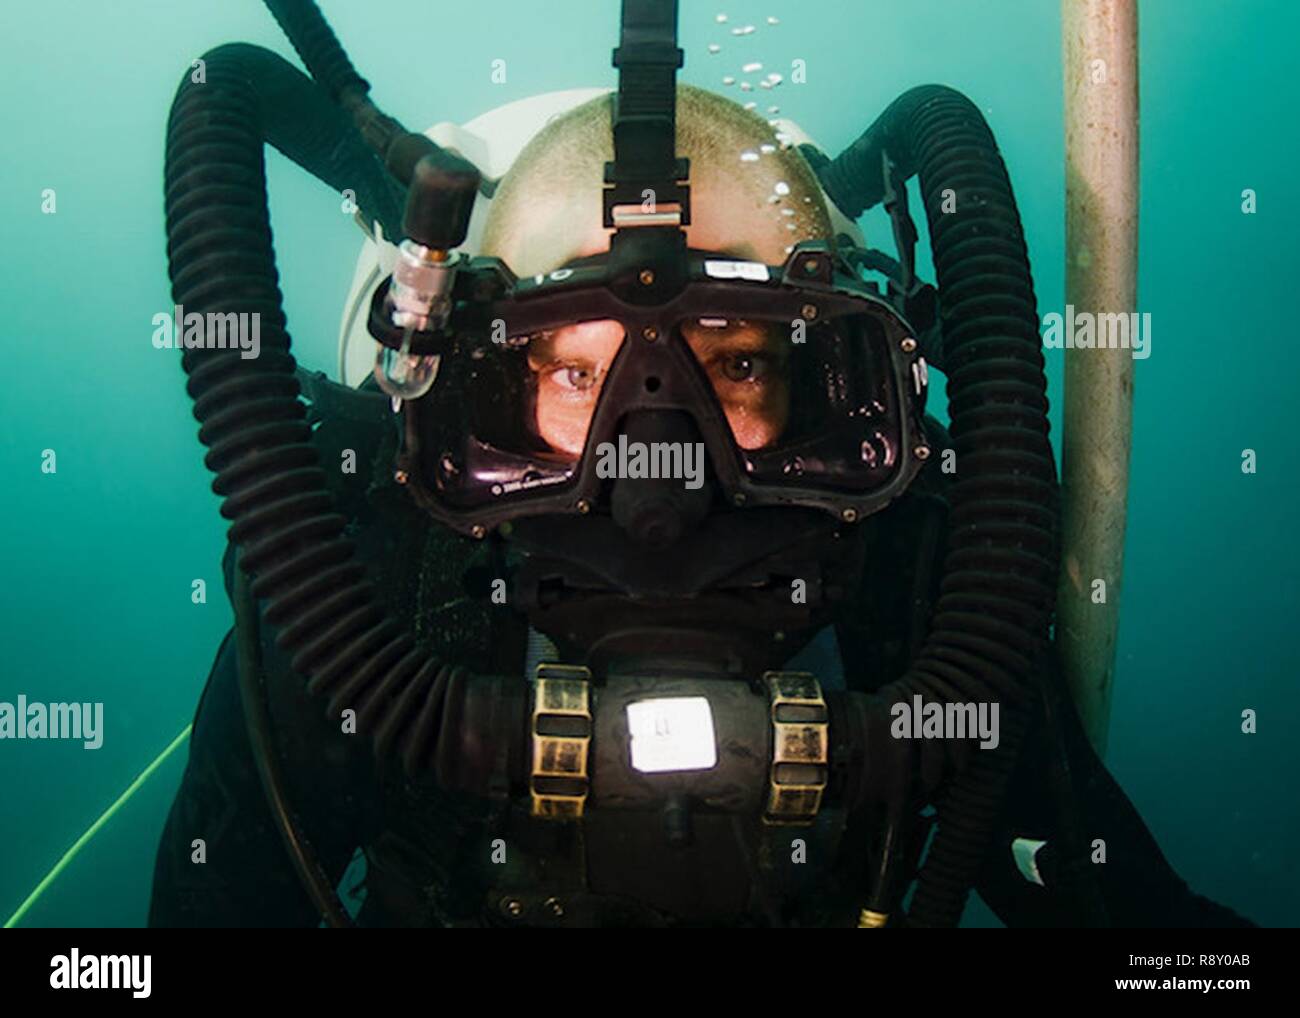 Chief Navy Diver Brian Jessup, assigned to Mobile Diving and Salvage Company ONE-SIX embarked aboard USNS Salvor (T-ARS 52), stands on a diving stage during a Defense POW/MIA Accounting Agency (DPAA) underwater recovery operation off the coast of Madang, Papua New Guinea, Dec. 7, 2018. The team was searching for personnel who went missing during WWII. DPAA conducts global search, recovery and laboratory operations to provide the fullest possible accounting of our missing personnel to their families and the nation. Stock Photo